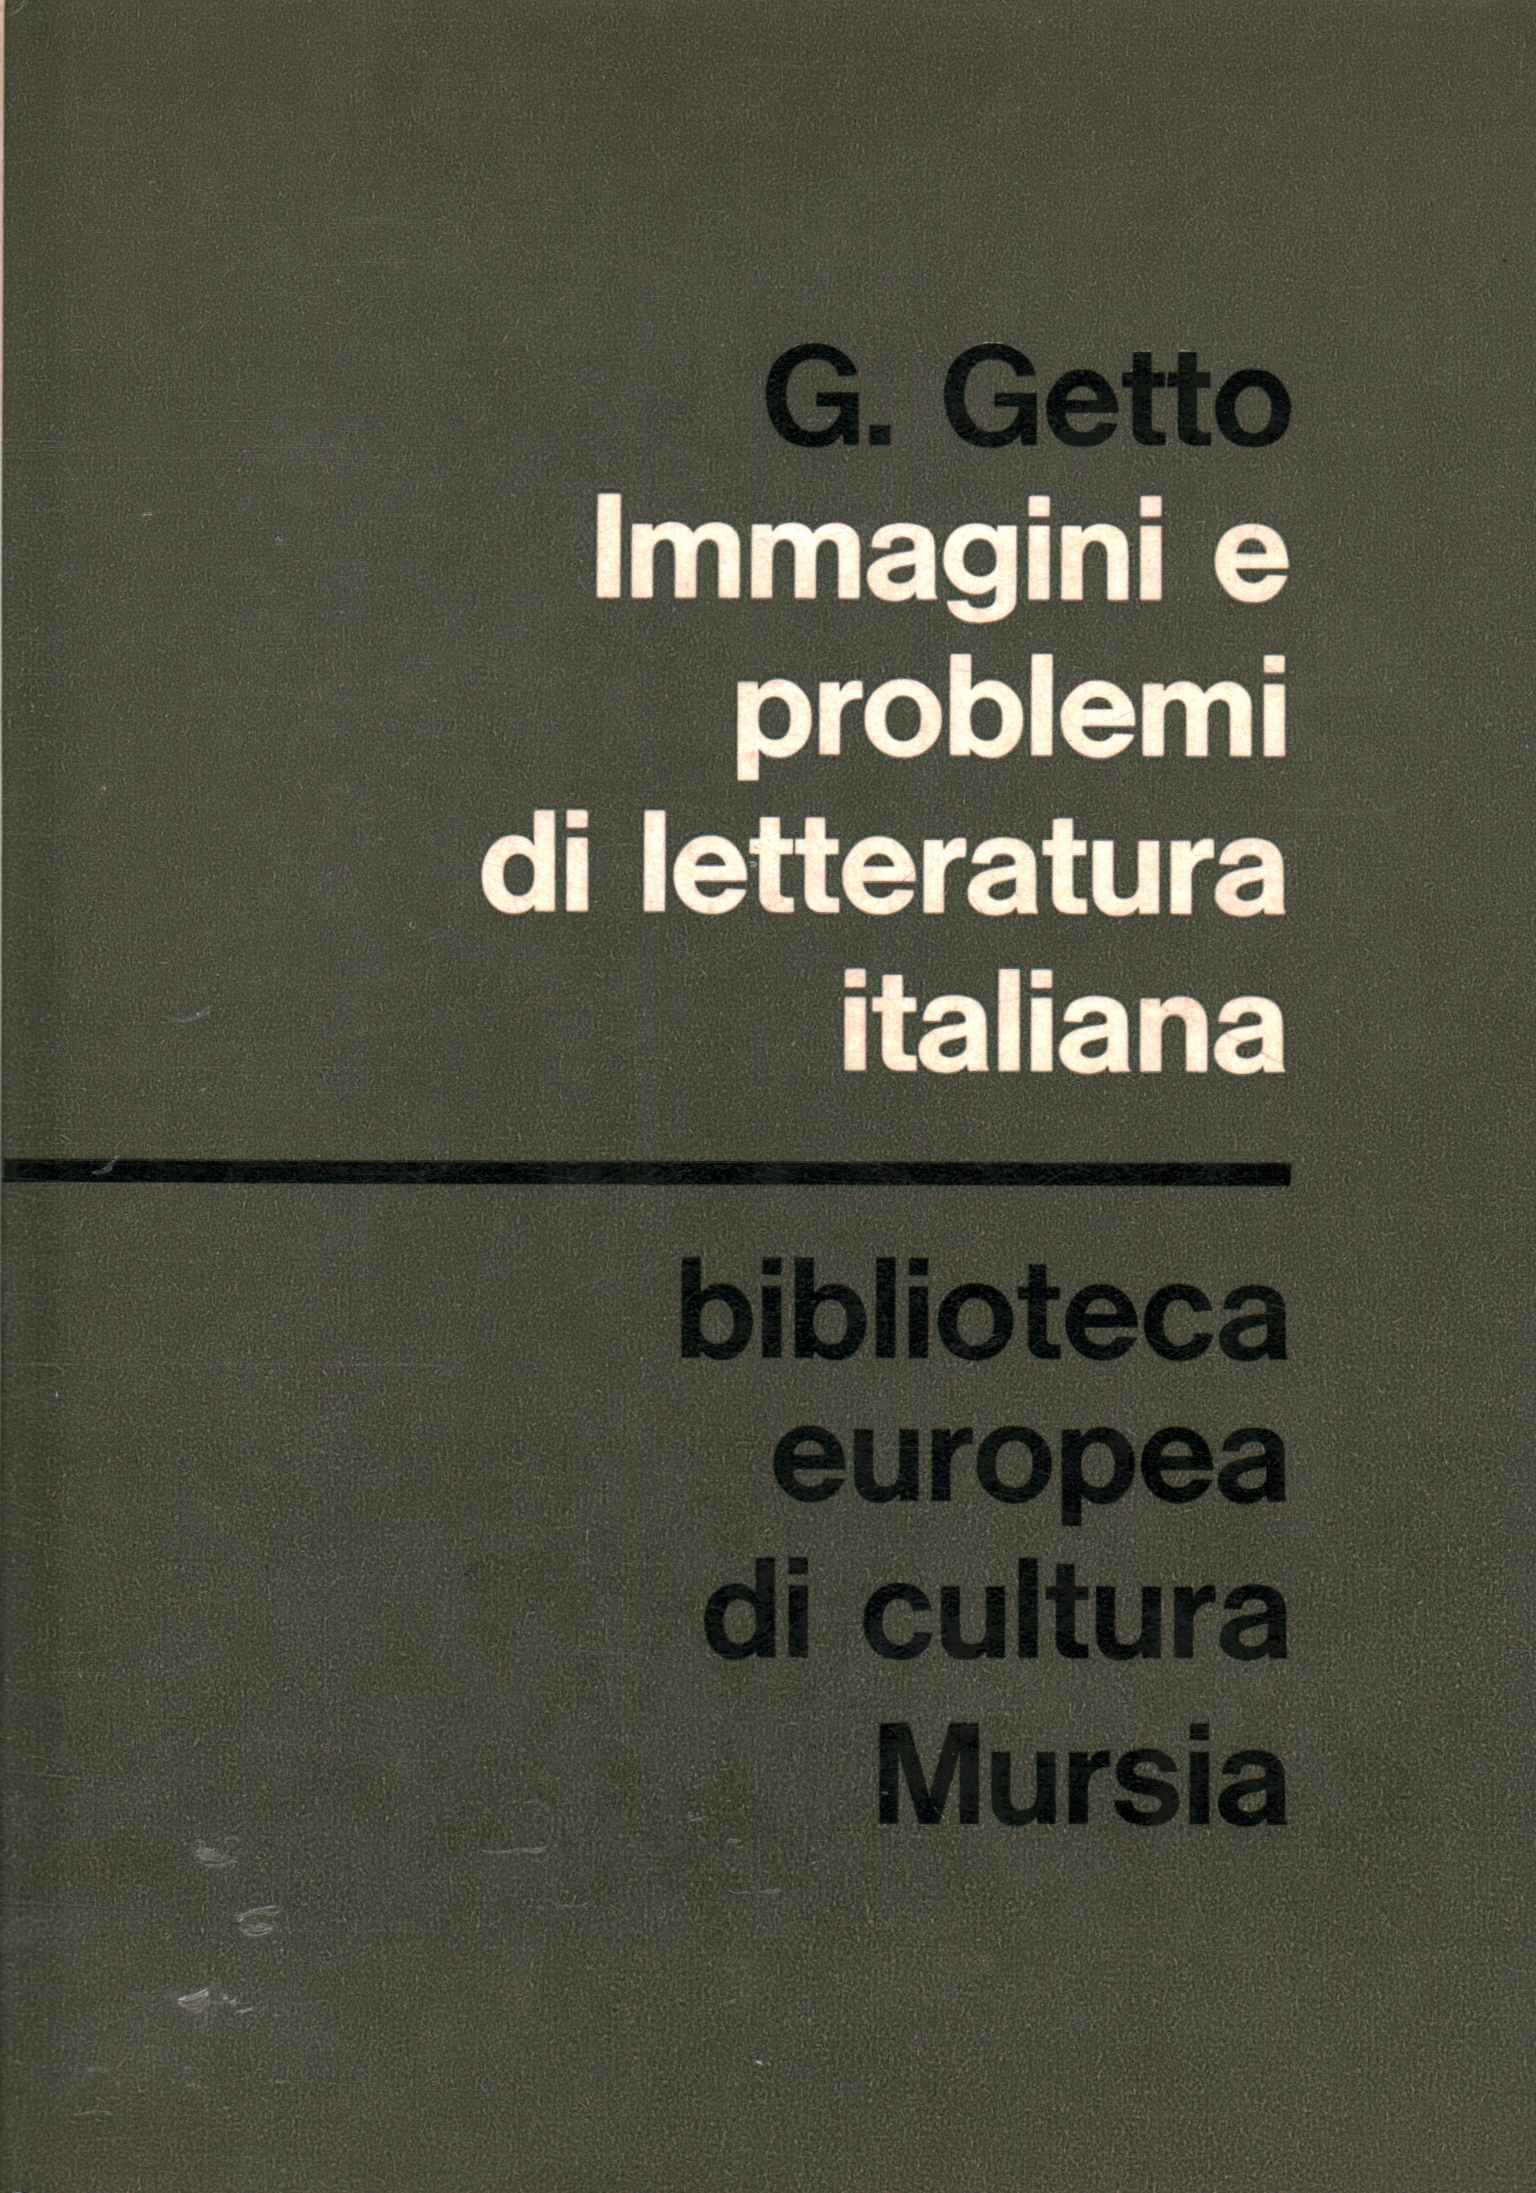 images and problems of Italian literature